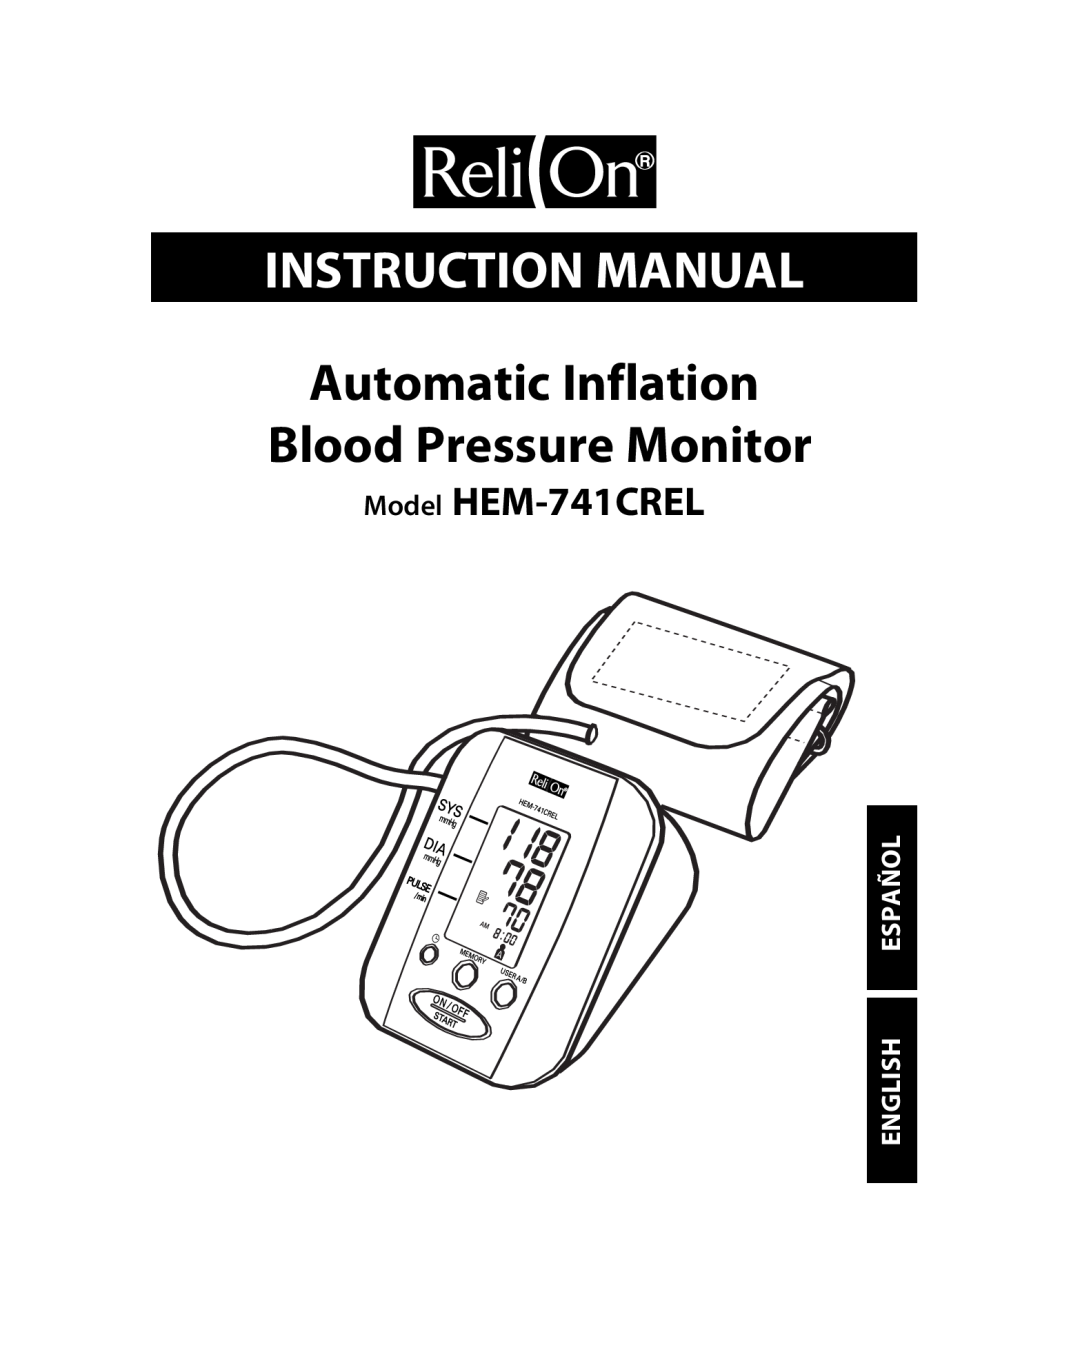 Omron Healthcare manual Instruction Manual, Automatic Inflation Blood Pressure Monitor, Model HEM-741CREL 